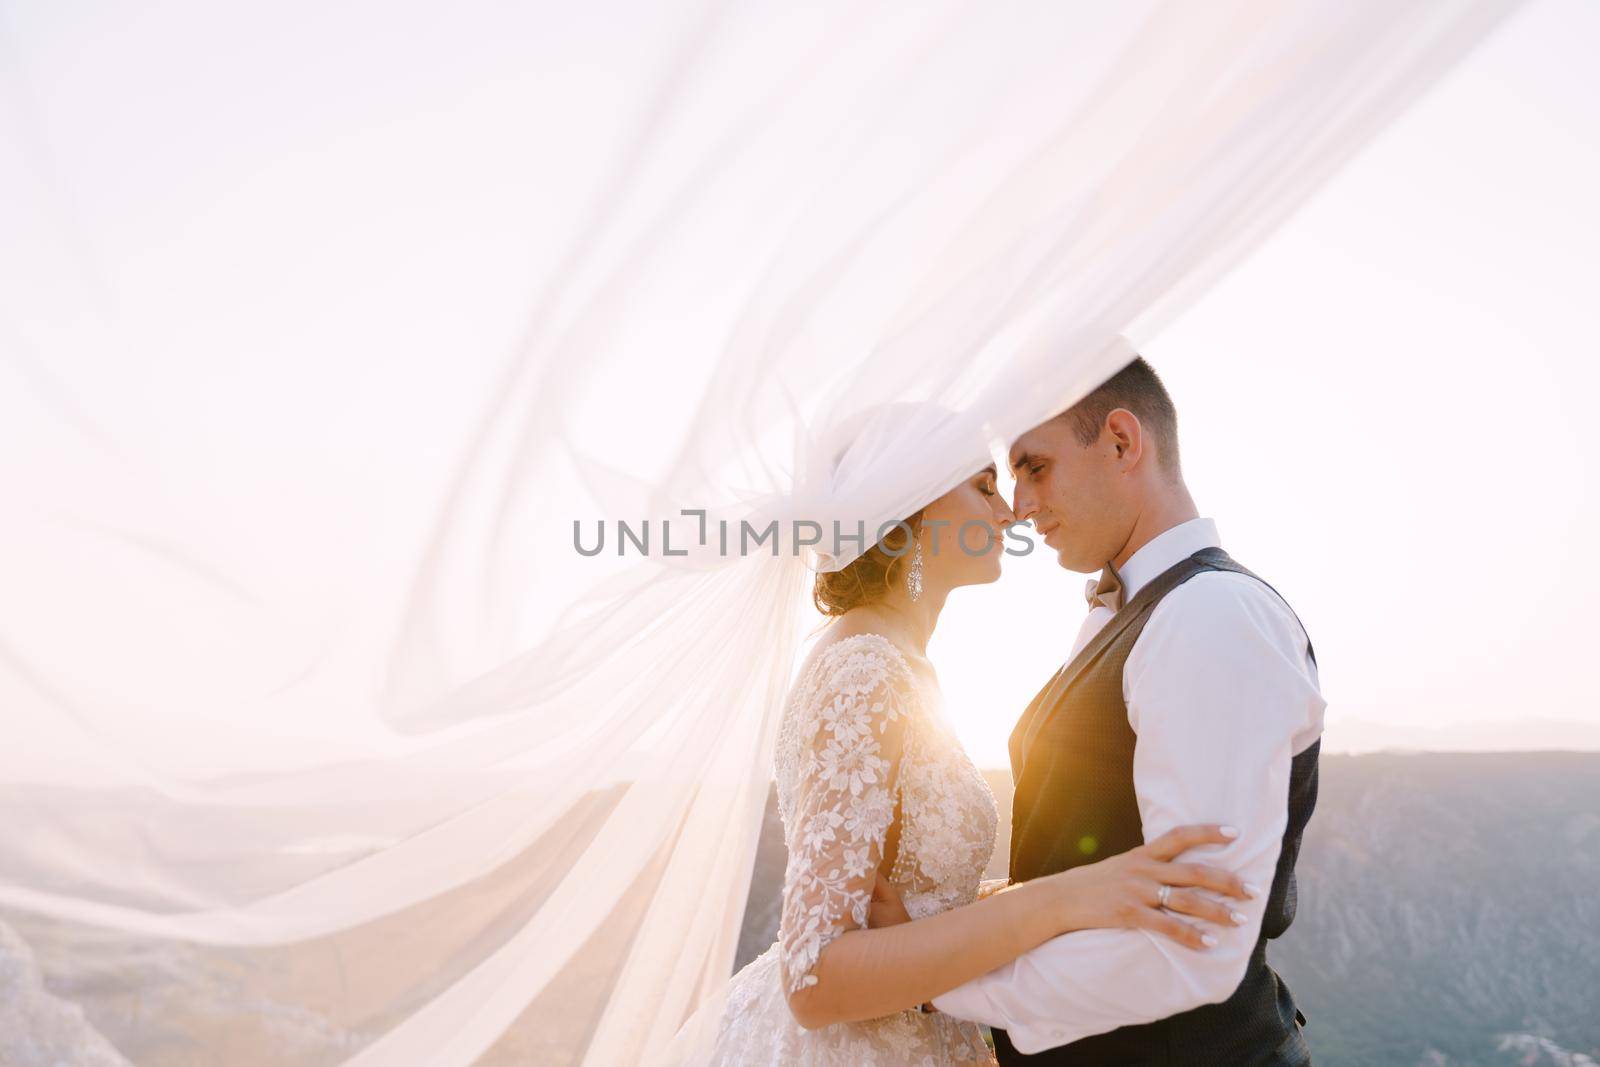 The wedding couple cuddles on top of the mountain at sunset, the groom hugs the bride by the waist, the veil is waved into the air.